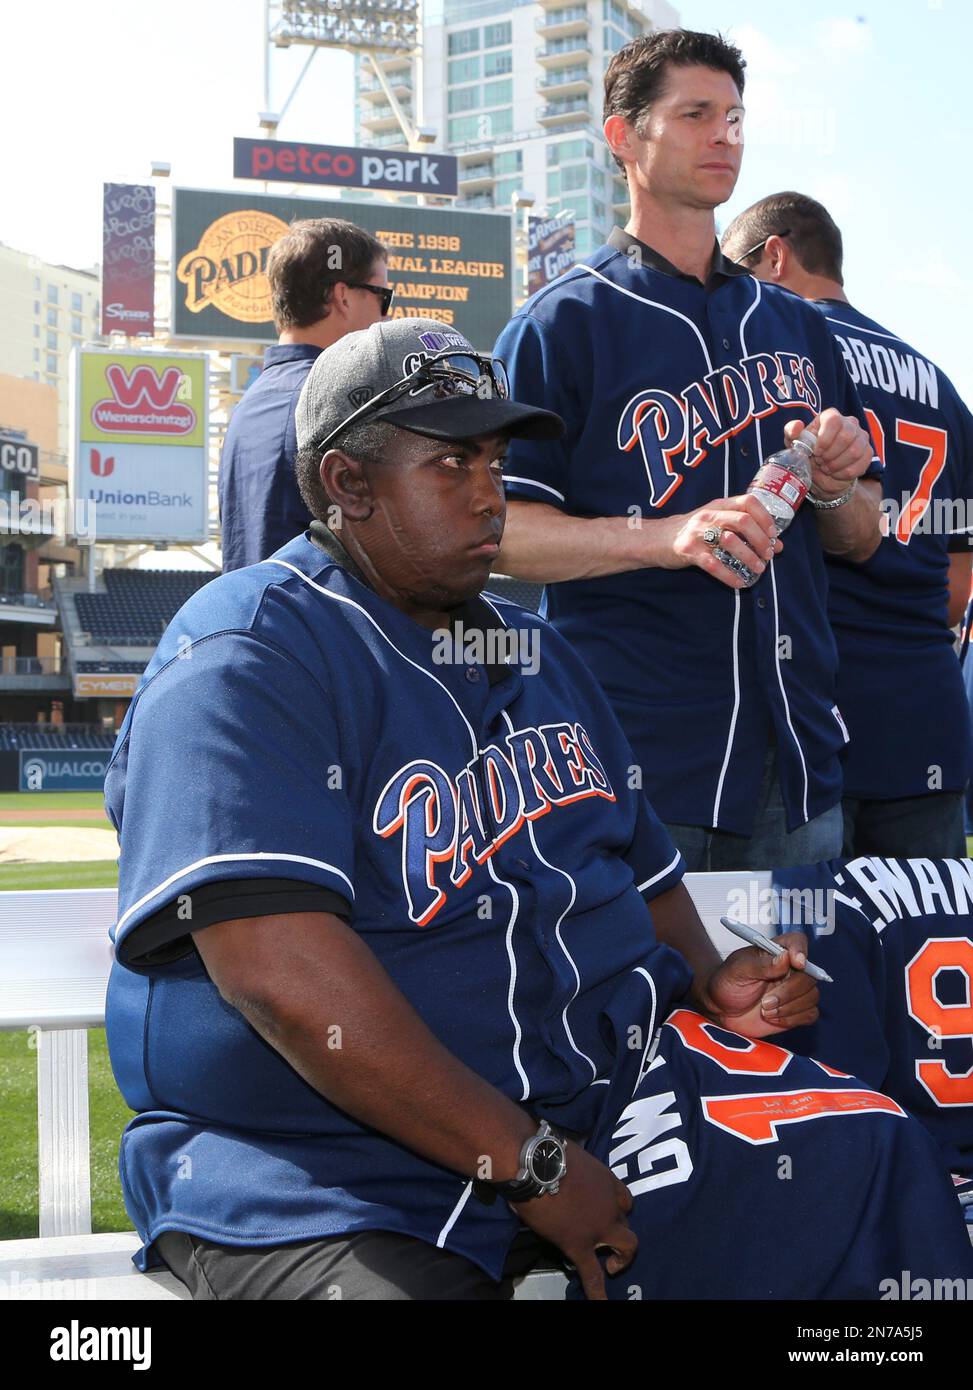 Hall of Fame ball player Tony Gwynn signs a 1998 jersey during